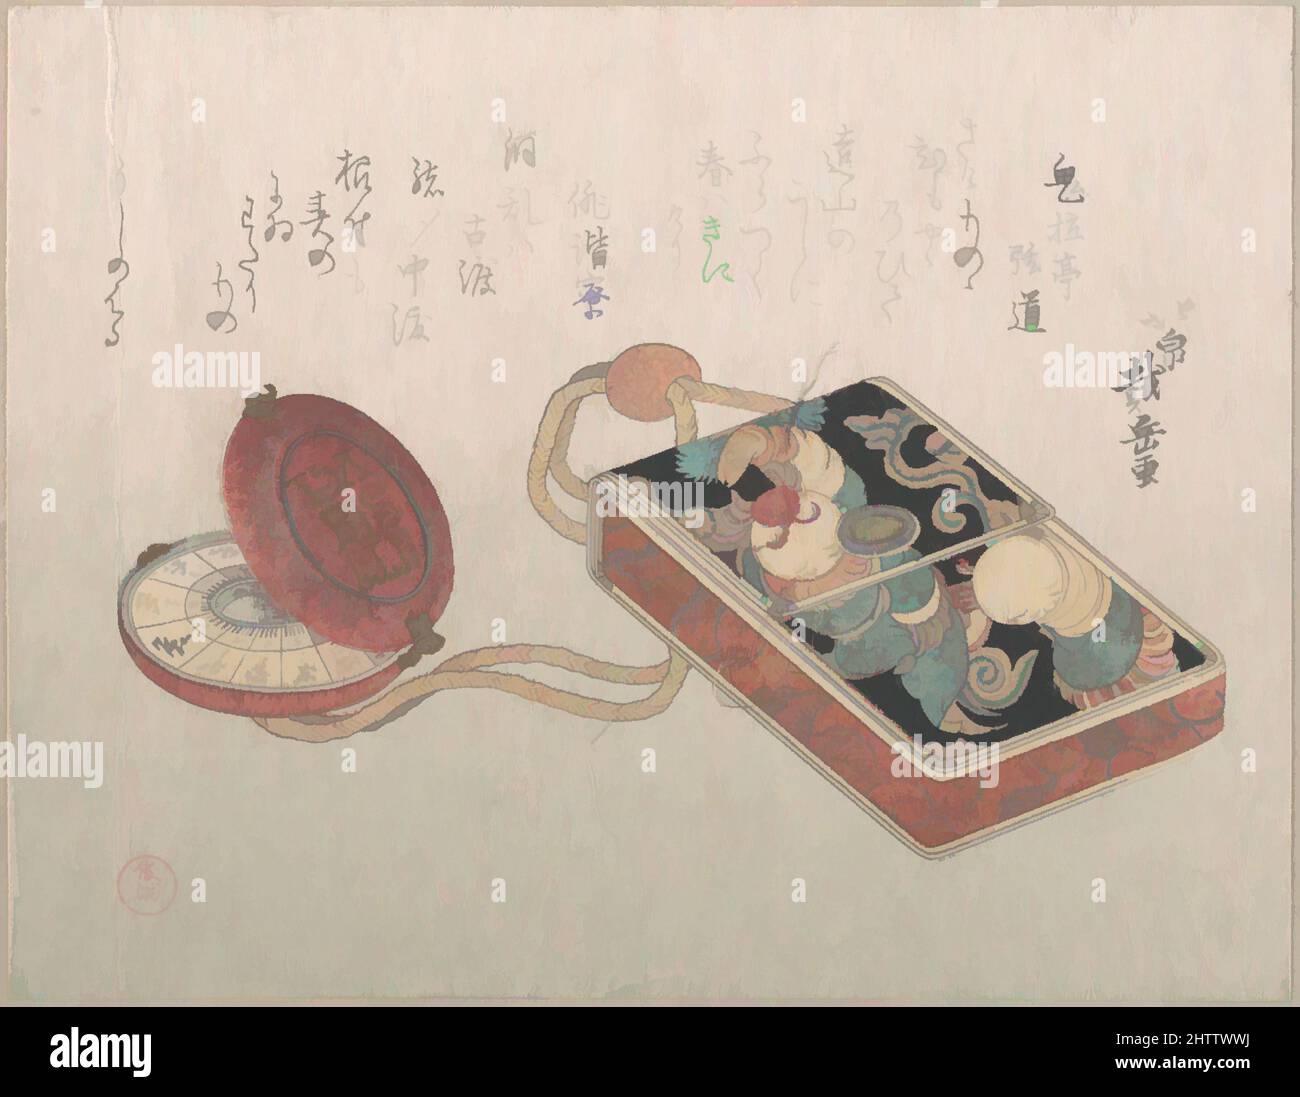 Art inspired by 胴乱印籠と懐中時計根付, probably 1817, Japan, Part of an album of woodblock prints (surimono); ink and color on paper, 5 9/16 x 7 1/4 in. (14.1 x 18.4 cm), Prints, Hokusen Taigaku (Japanese, active 1805–1825), Surimono are privately published woodblock prints, usually commissioned, Classic works modernized by Artotop with a splash of modernity. Shapes, color and value, eye-catching visual impact on art. Emotions through freedom of artworks in a contemporary way. A timeless message pursuing a wildly creative new direction. Artists turning to the digital medium and creating the Artotop NFT Stock Photo